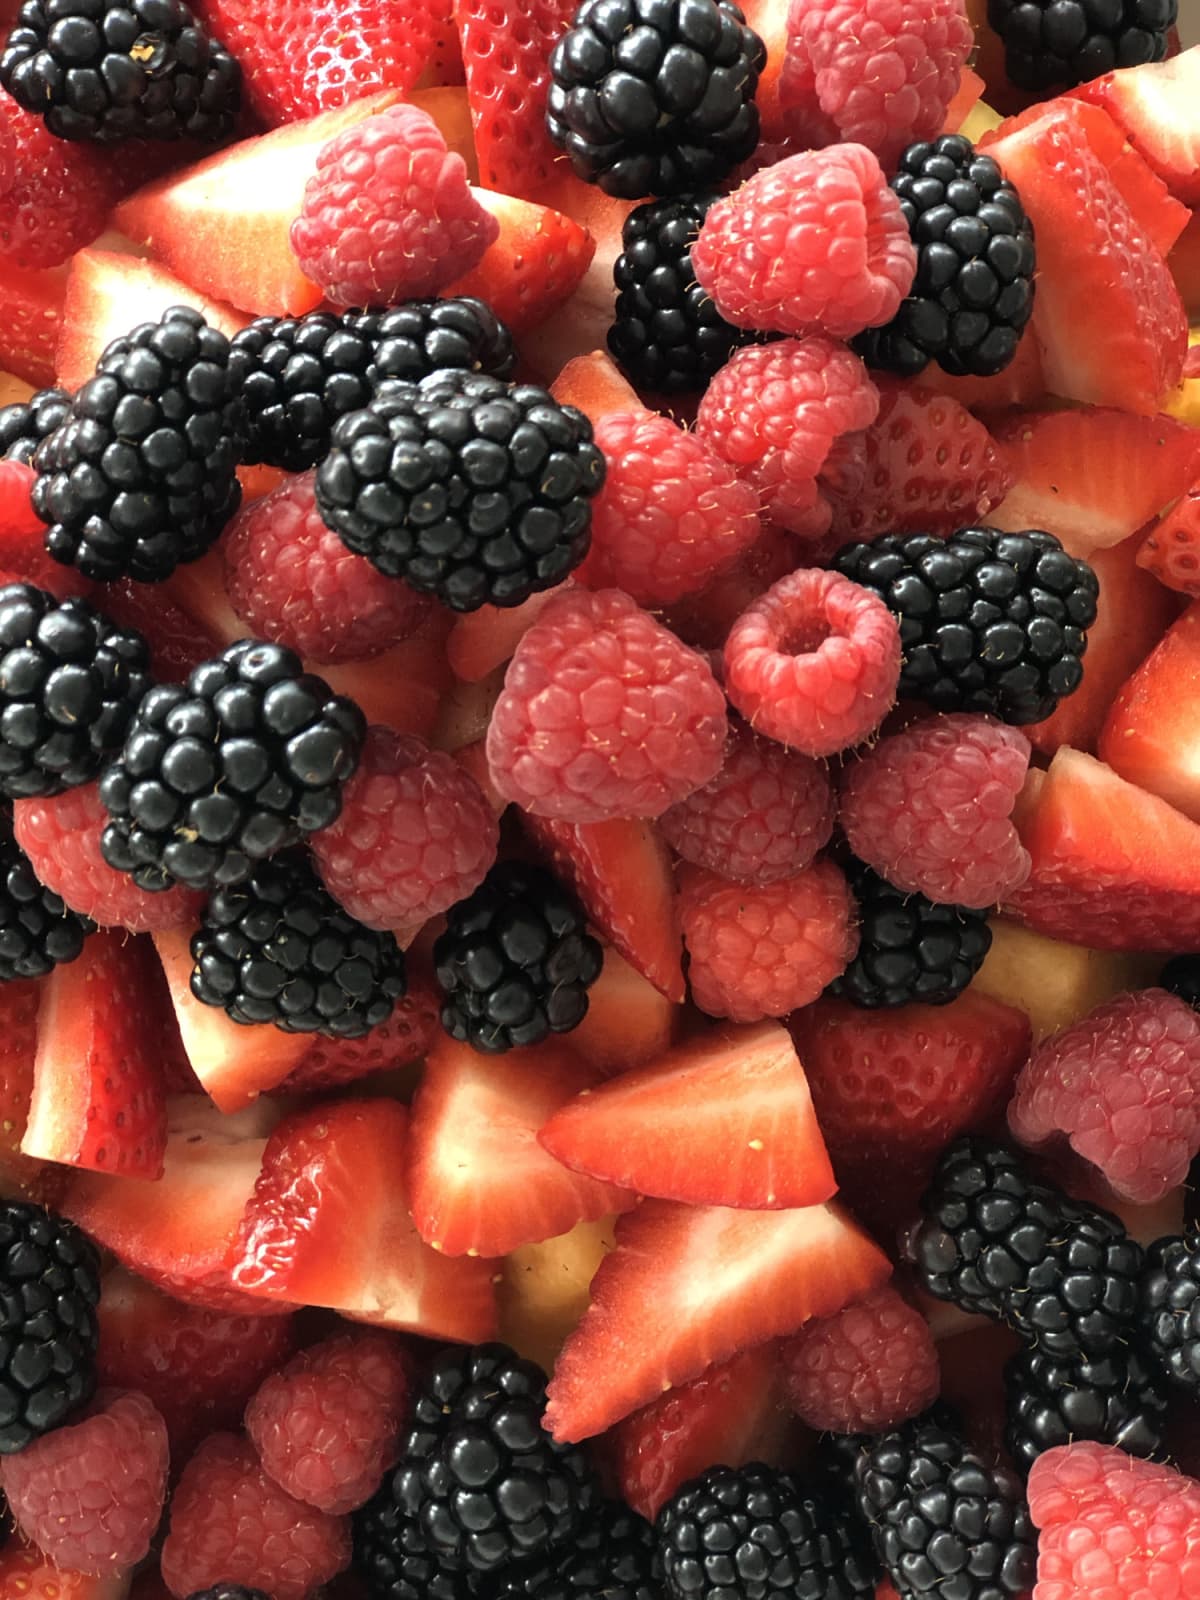 A mixture of fresh strawberries, raspberries and blackberries as part of a springtime meal.